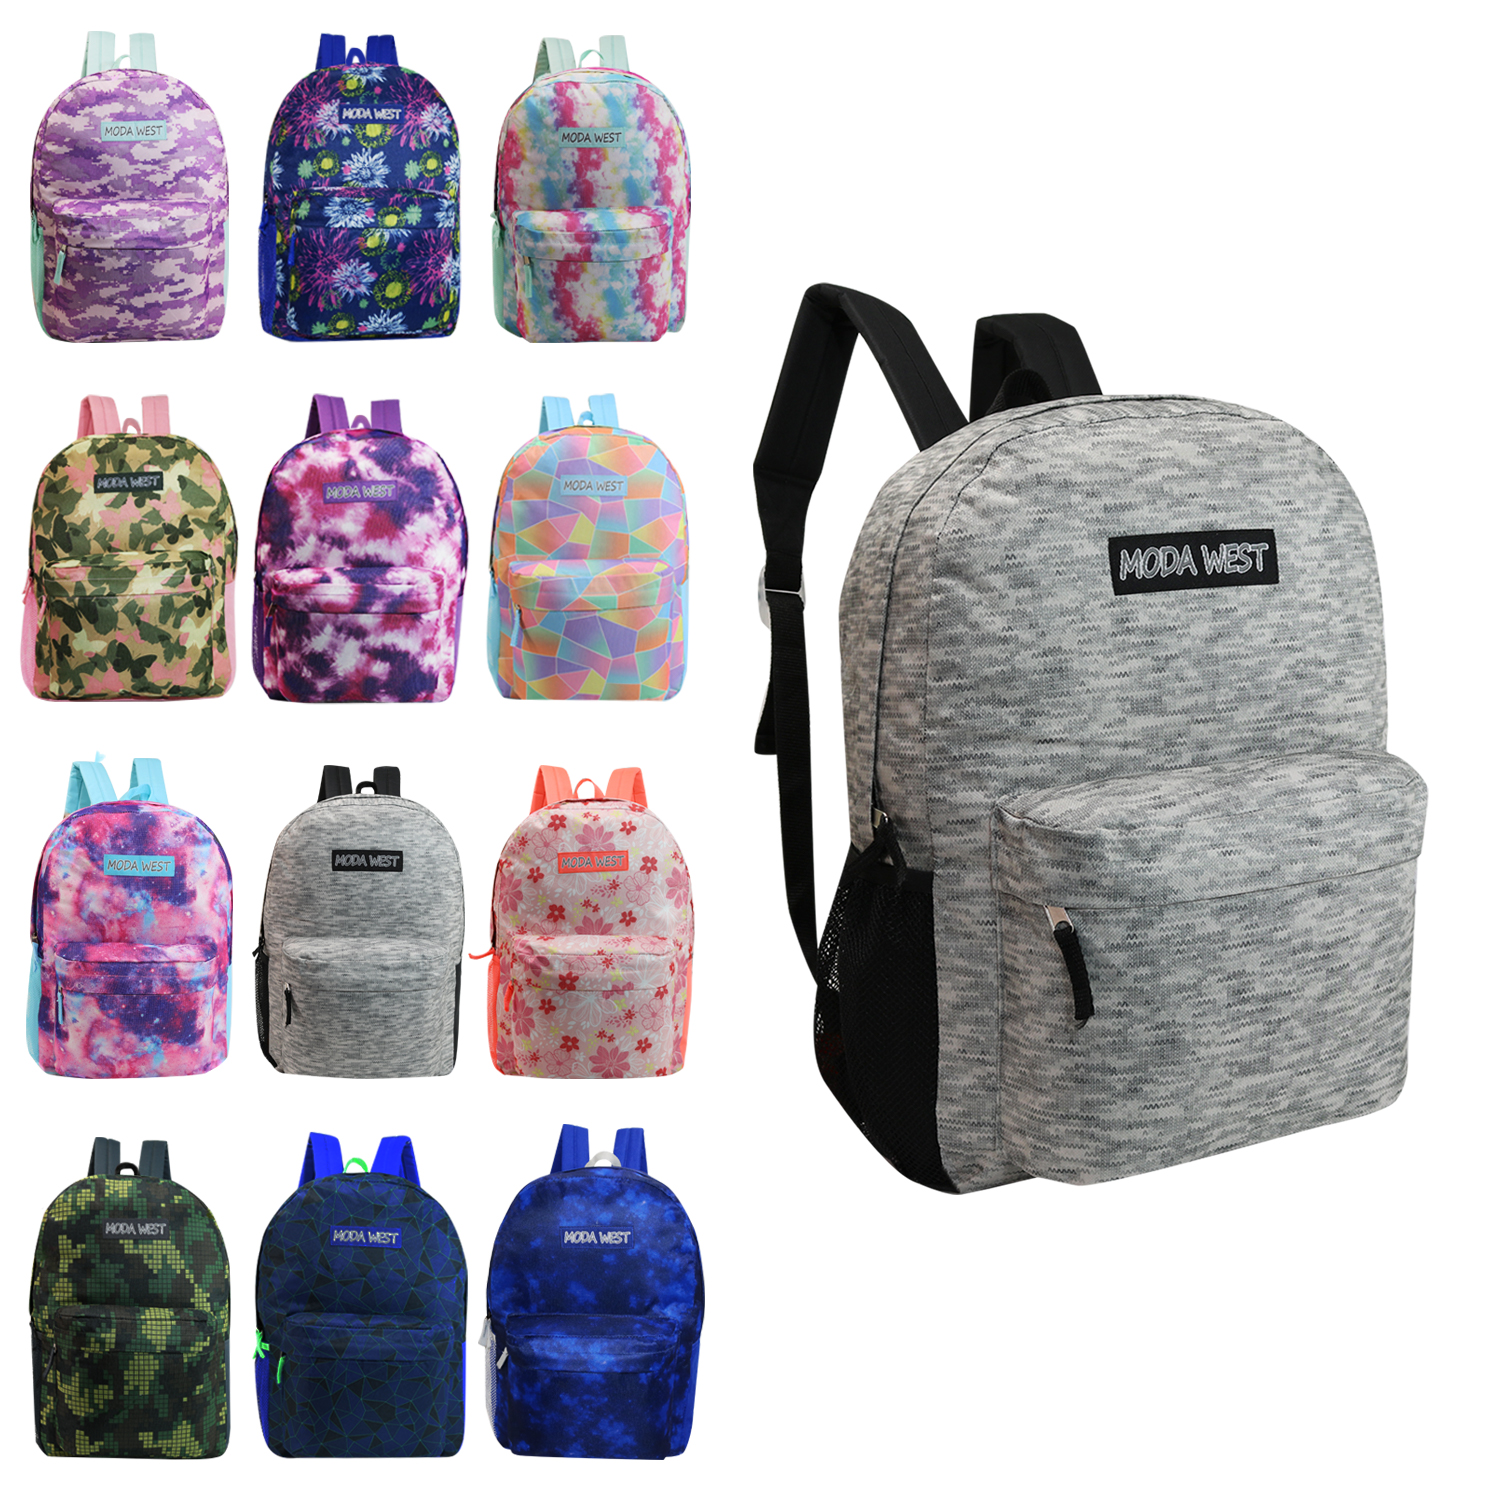 ''17'''' Lightweight Classic Style Printed BACKPACKs w/ Adjustable Padded Straps - Heathered, Camo, & T